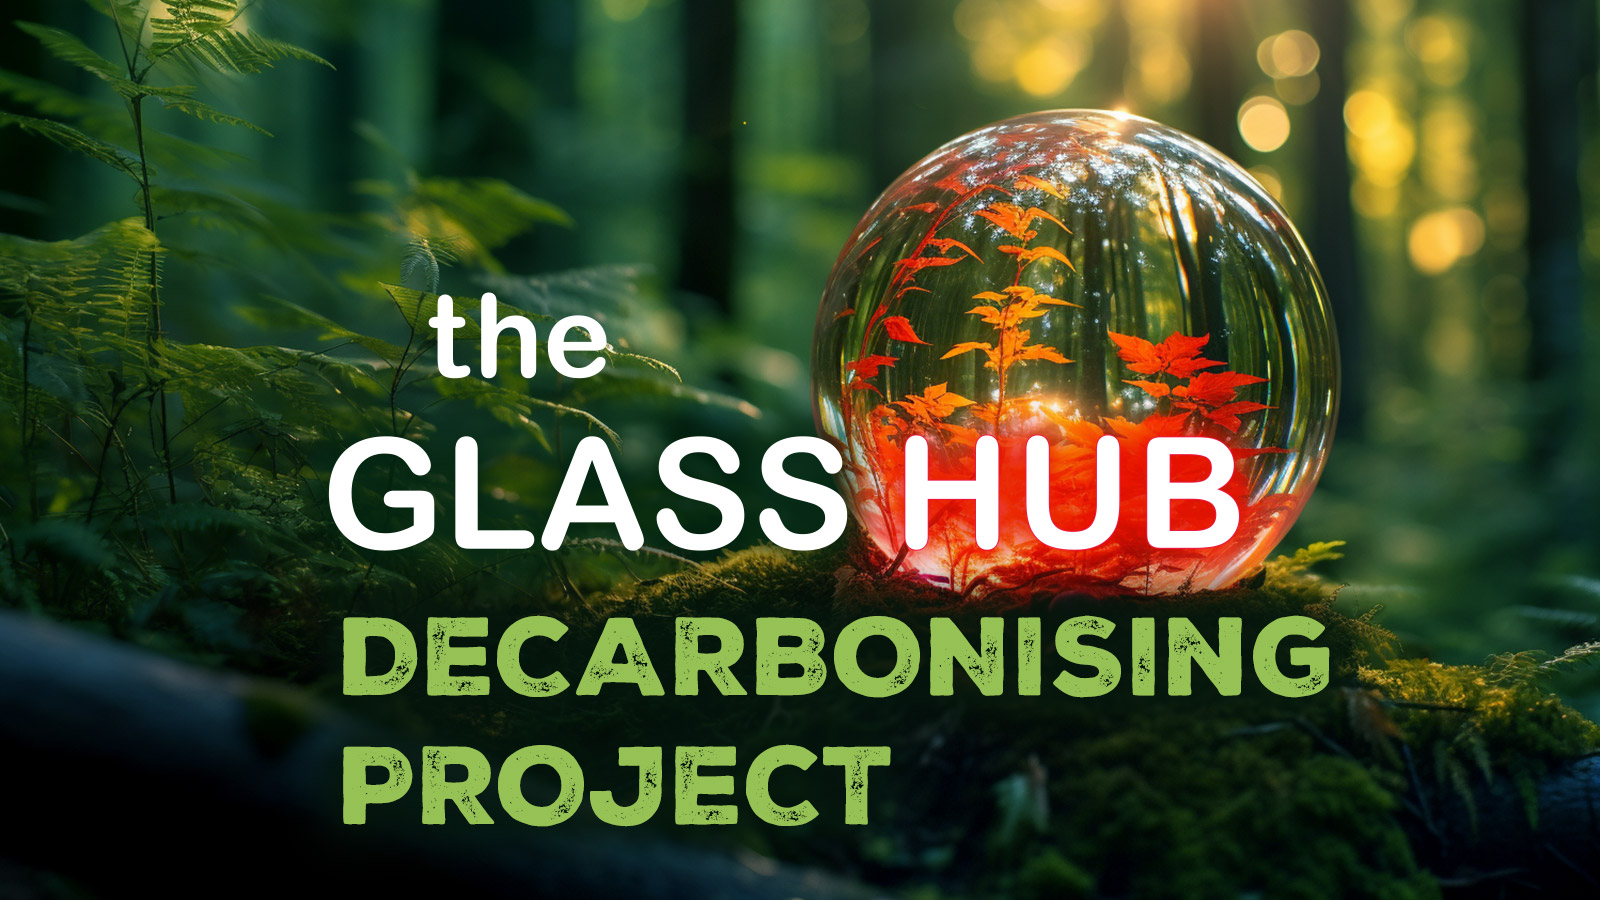 the glass hub decarbonising project